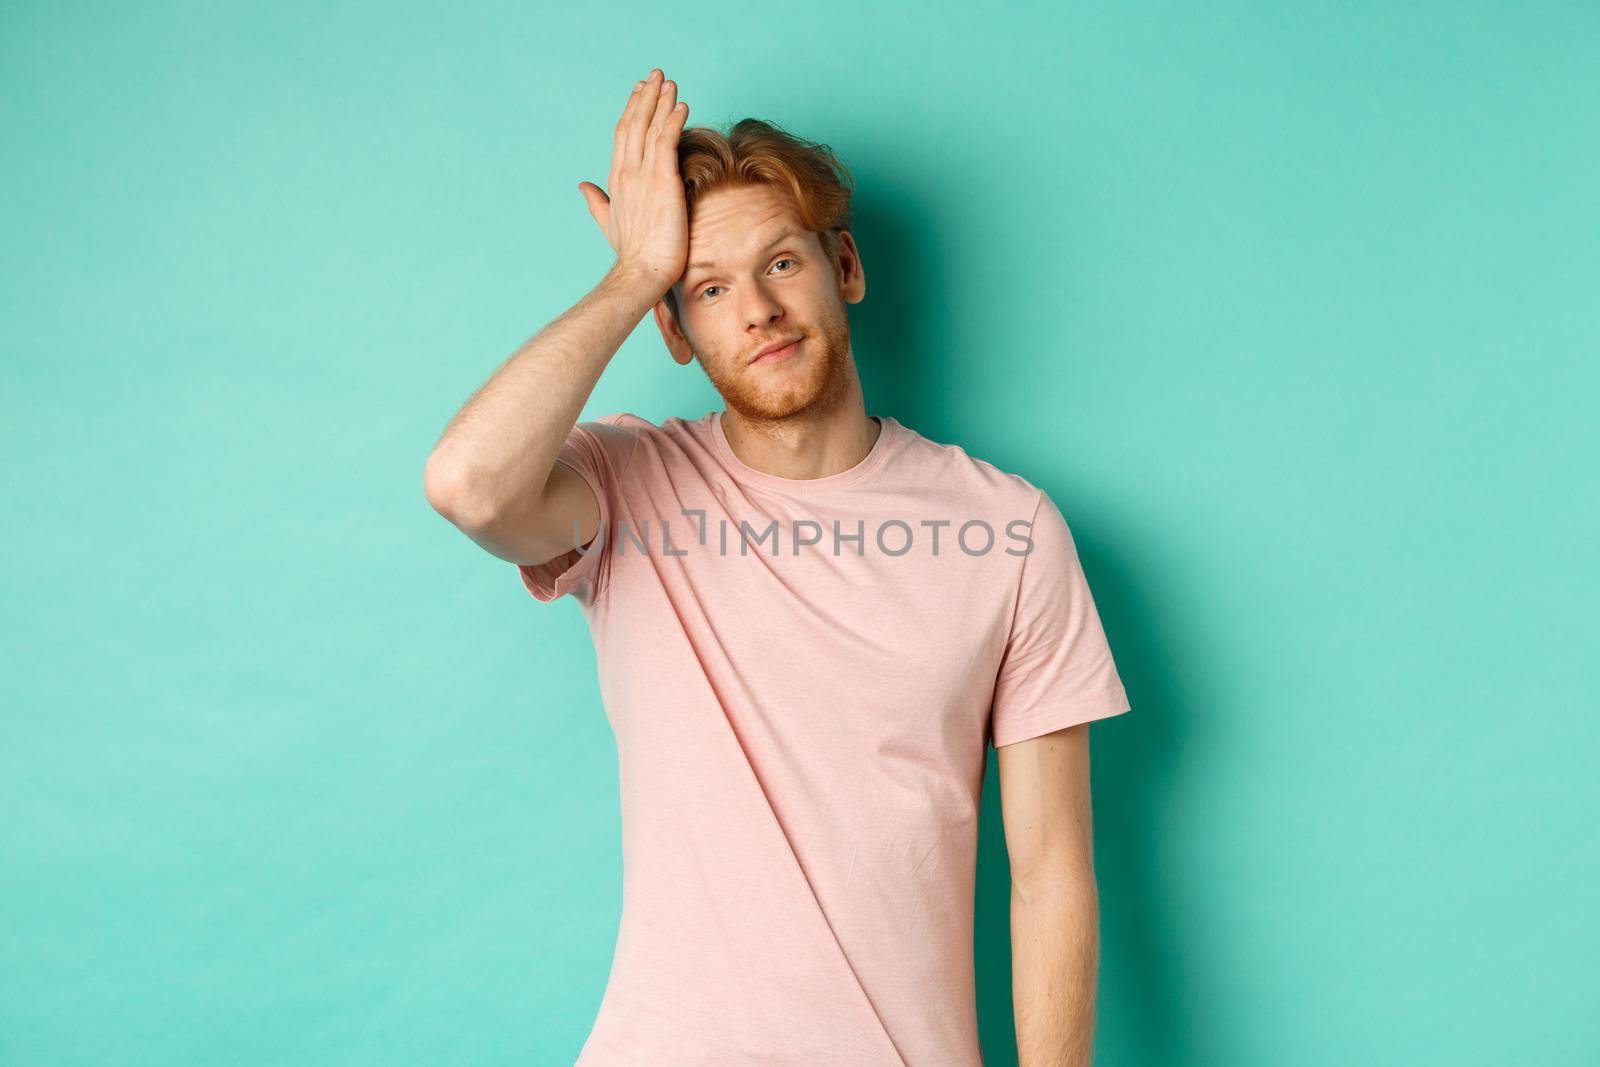 Annoyed and bothered redhead male model showing facepalm gesture, standing over mint background.